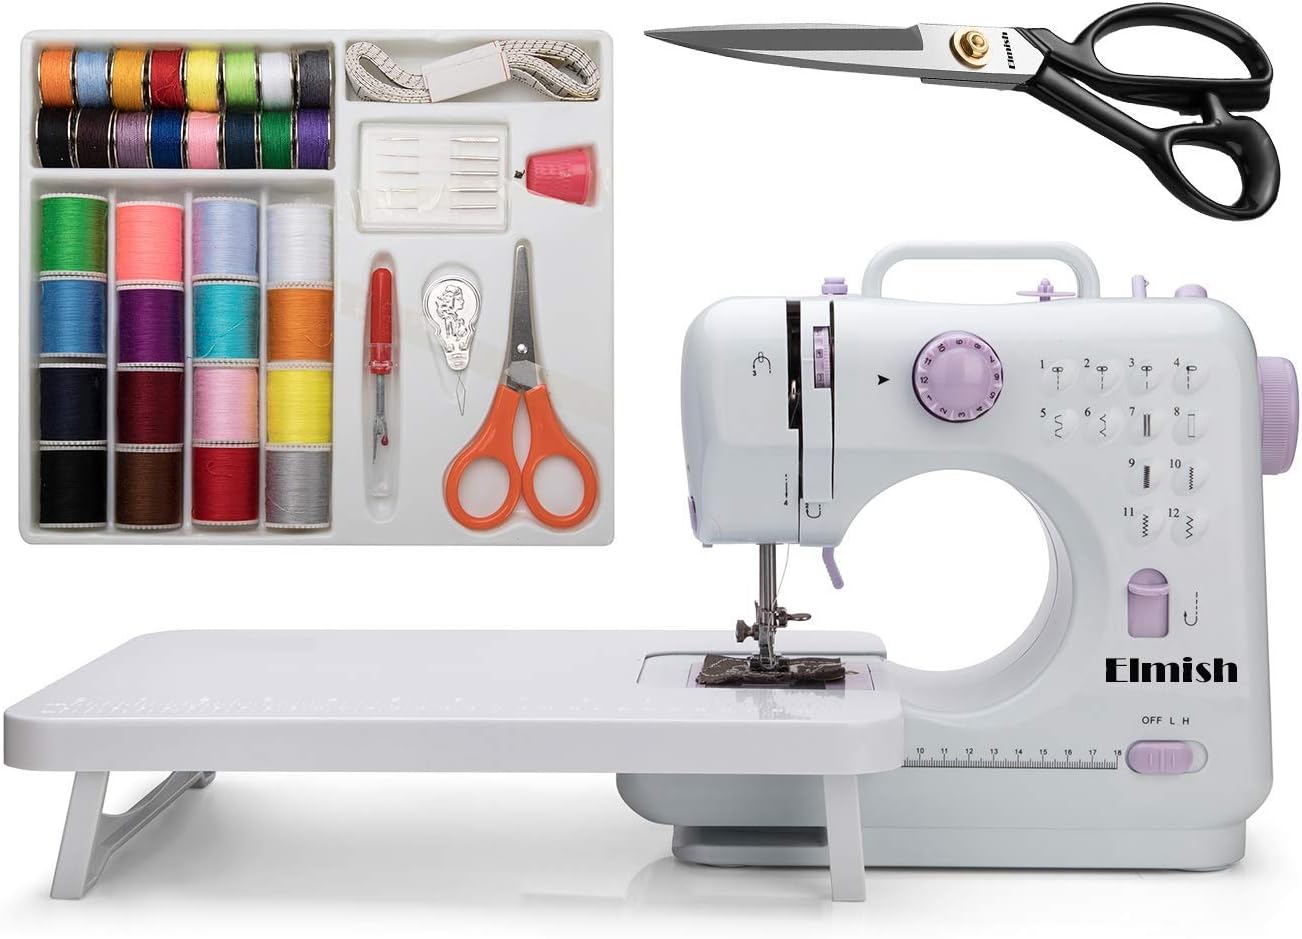 Elmish Sewing Machine (12 Stitches, 2 Speeds, Foot Pedal, LED Sewing Light) - Electric Overlock Sewing Machines - Small Household Sewing Handheld Tool EM-007-E 